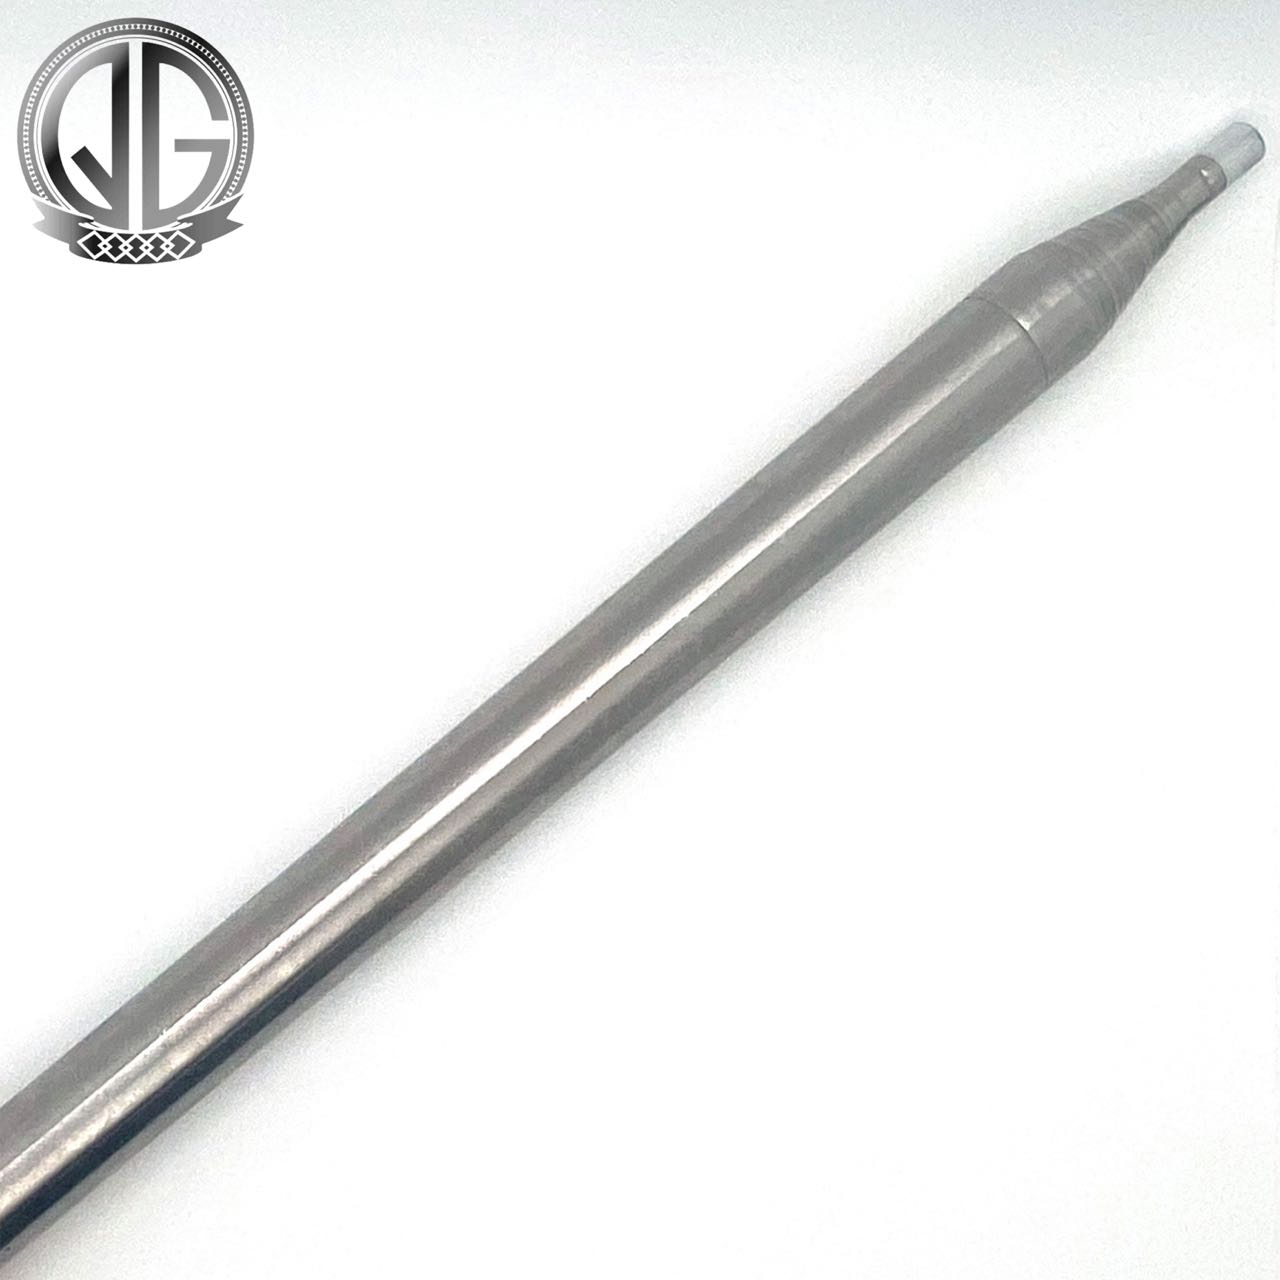 Stainless Steel Telescopic Pole for Golf Pick Up Tool